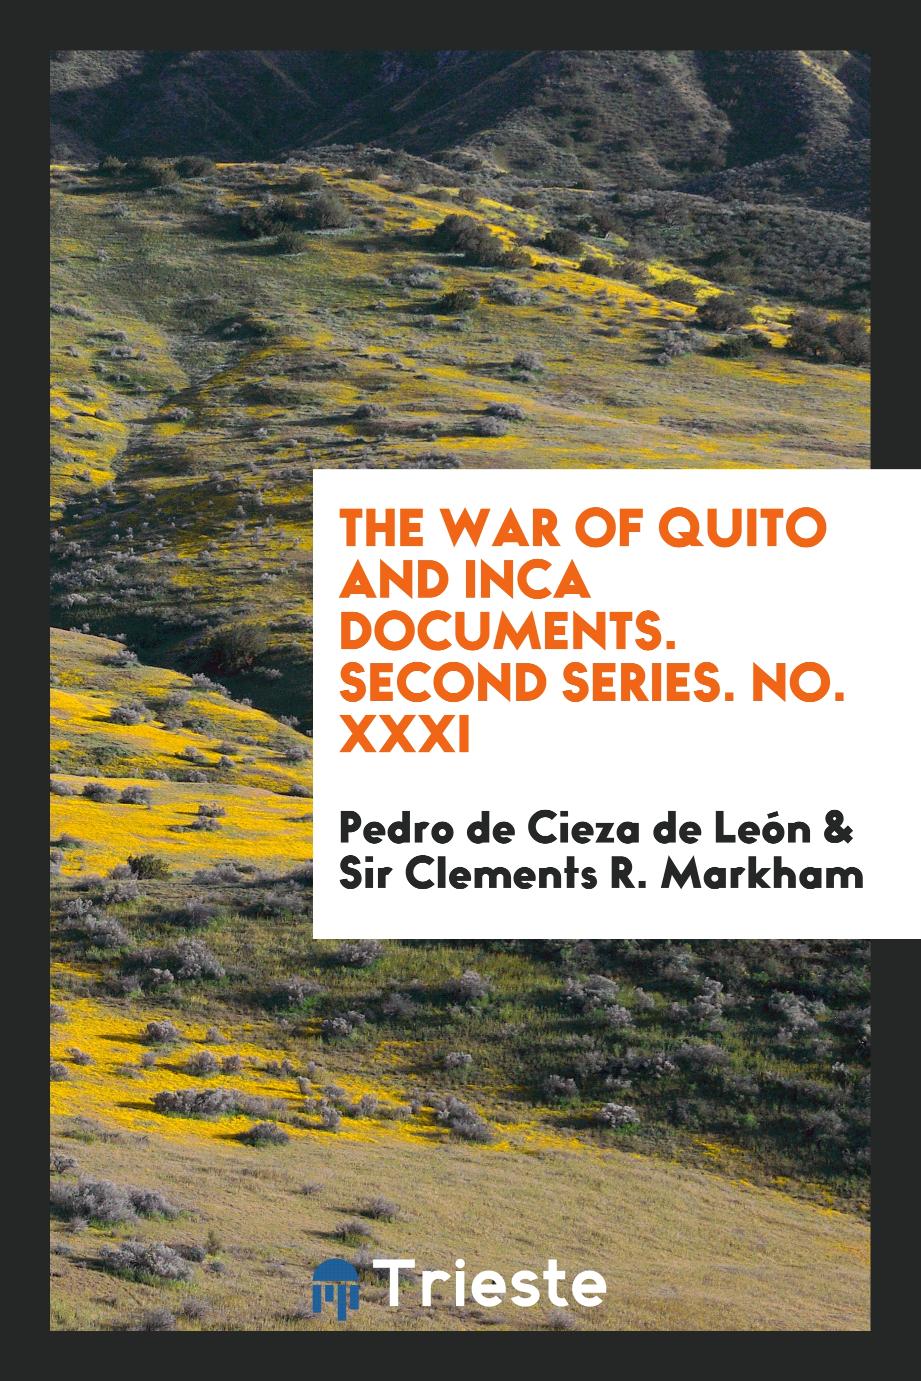 The war of Quito and inca documents. Second series. No. XXXI